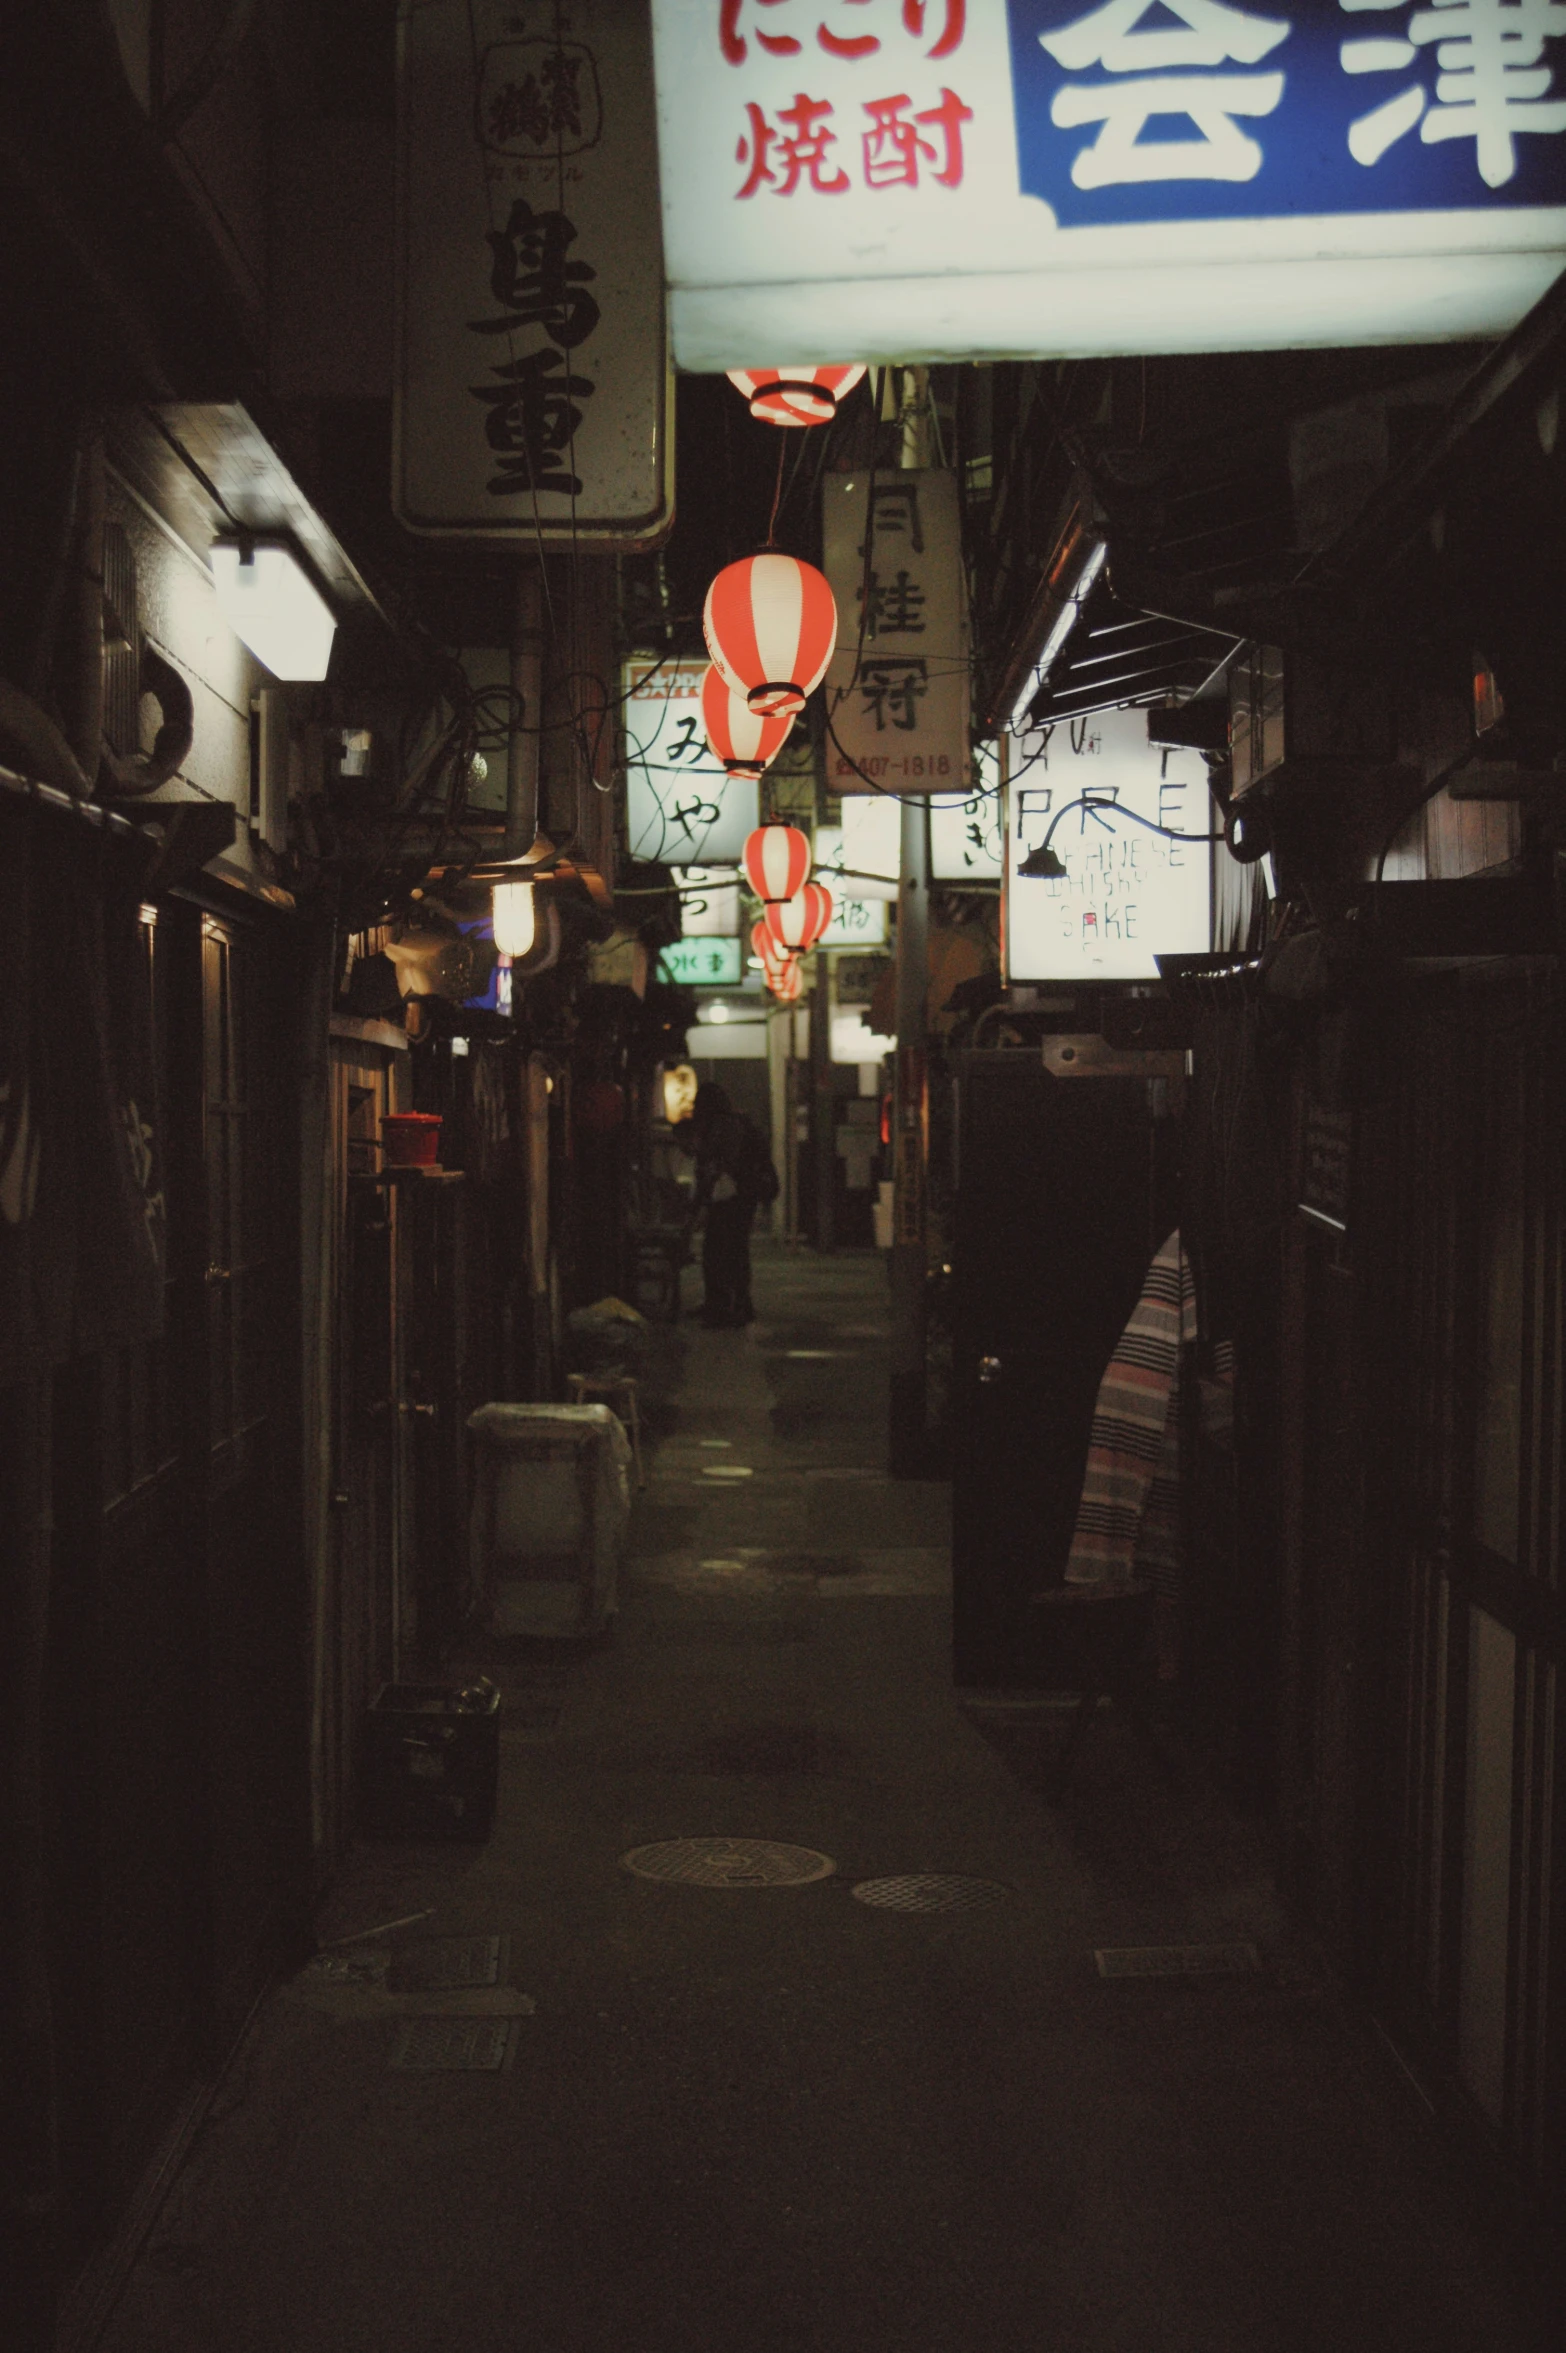 this is a small alley with several people in it